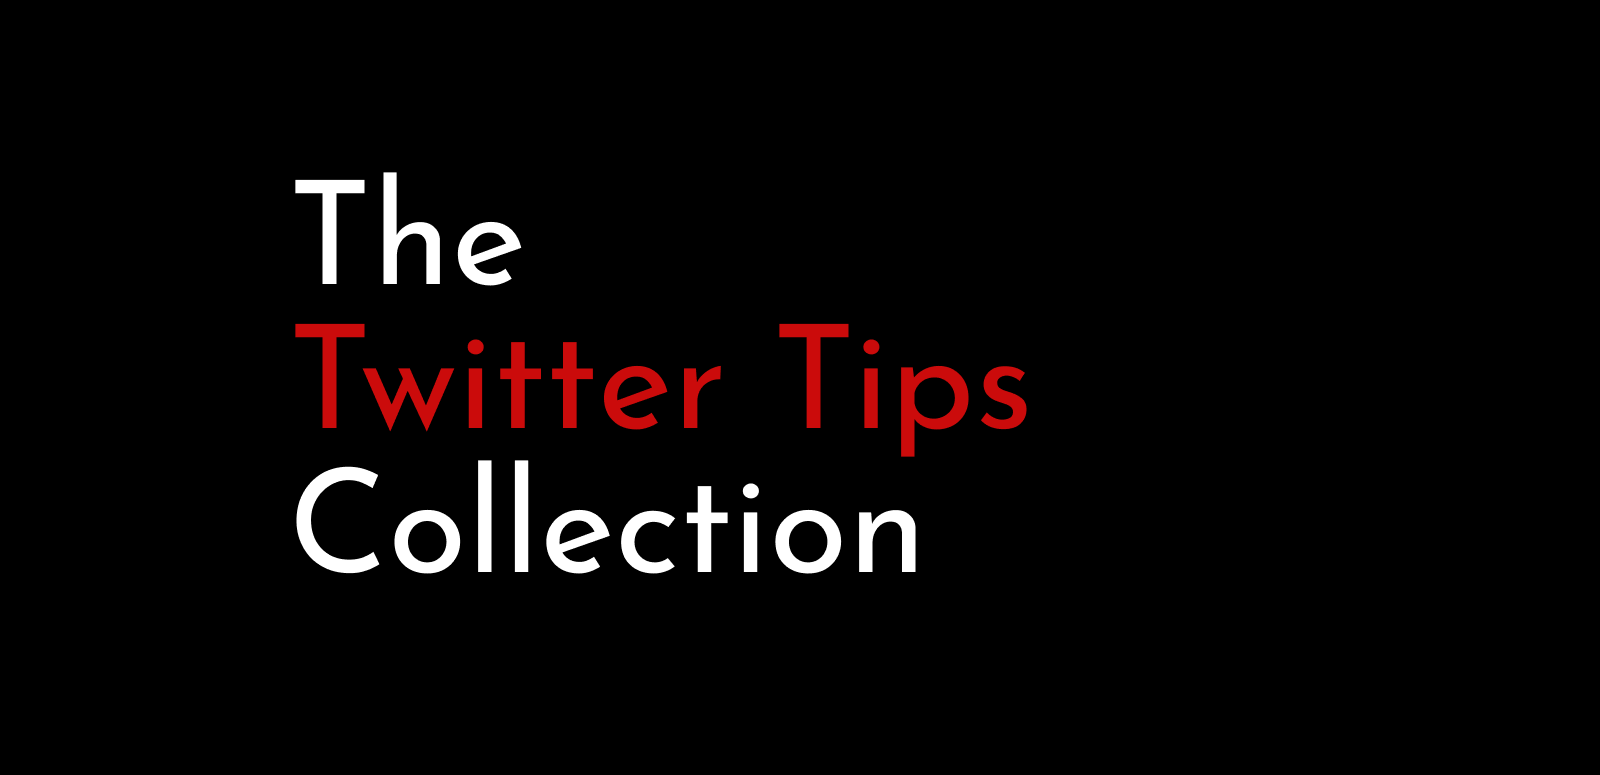 The Twitter Tips Collection